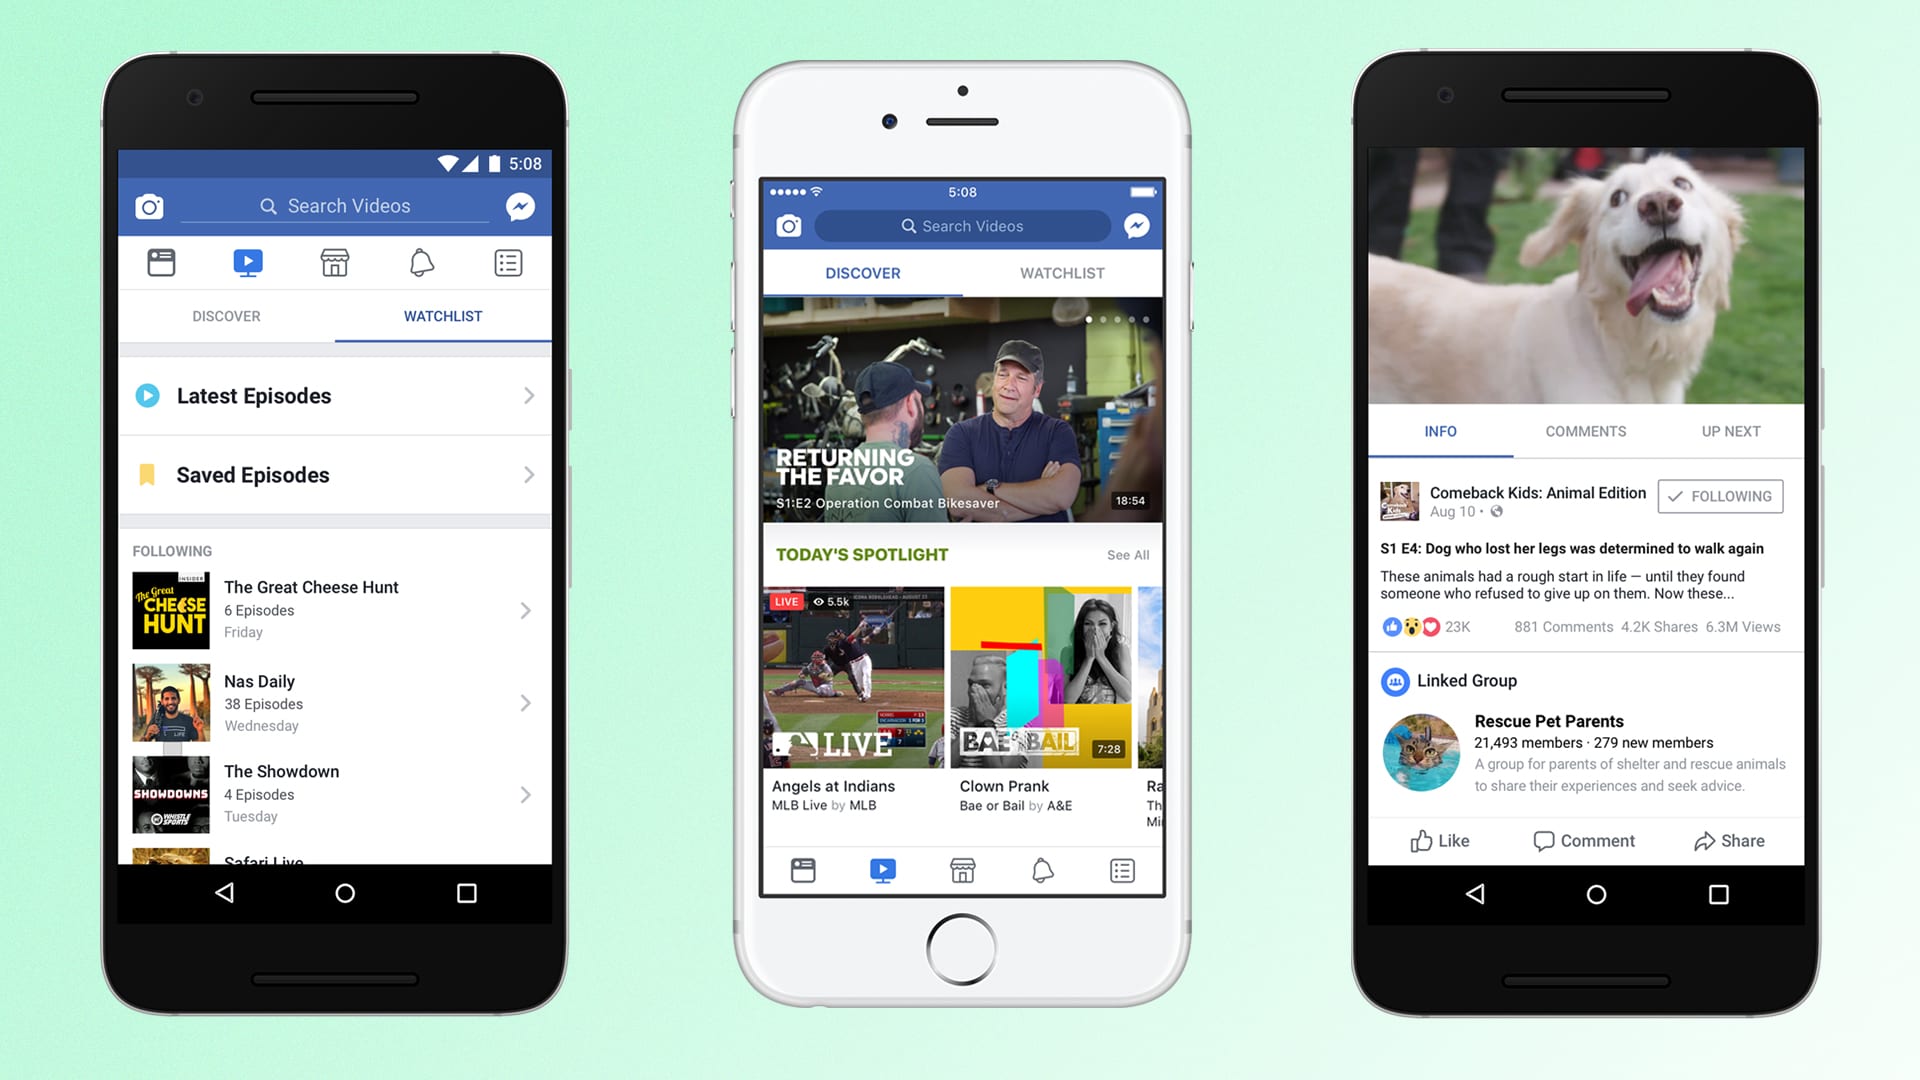 Facebook looks to launch news programs on its Watch video platform